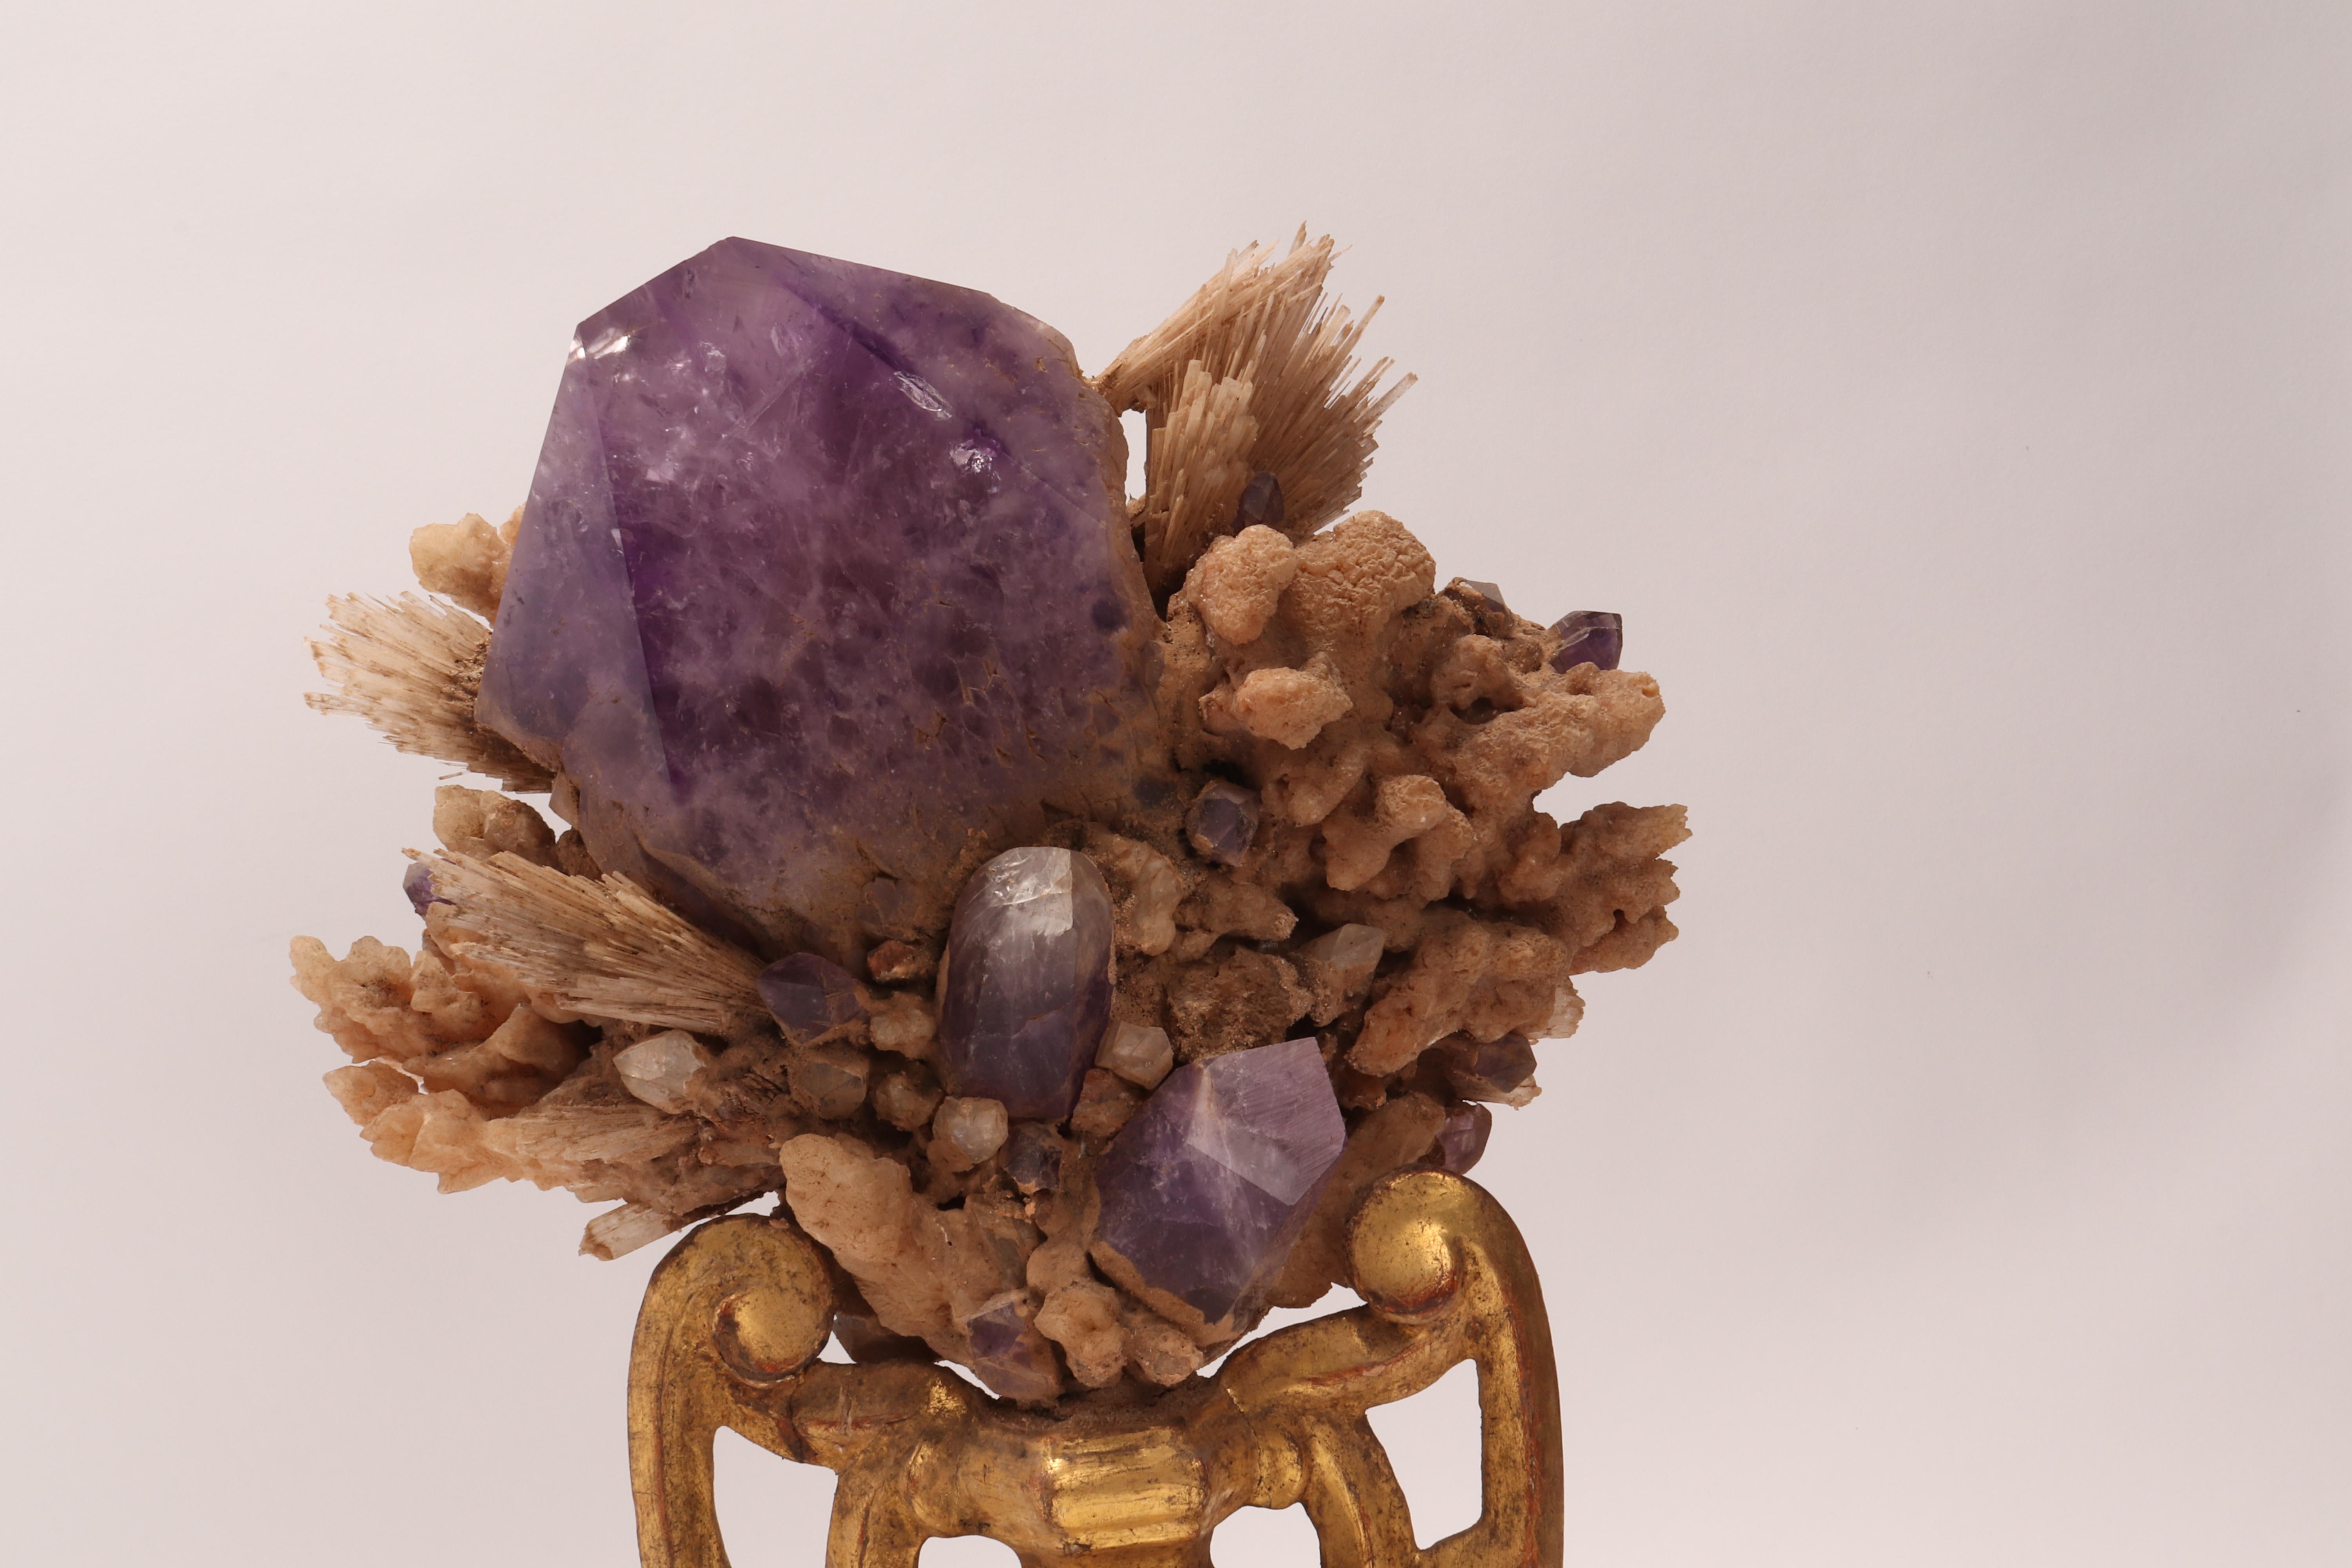 A Naturalia mineral specimen. A Druze of Amethiste, calcite, and calcite flowers crystals, mounted over a guild-plated wooden base on a vase shape, Italy, circa 1880.